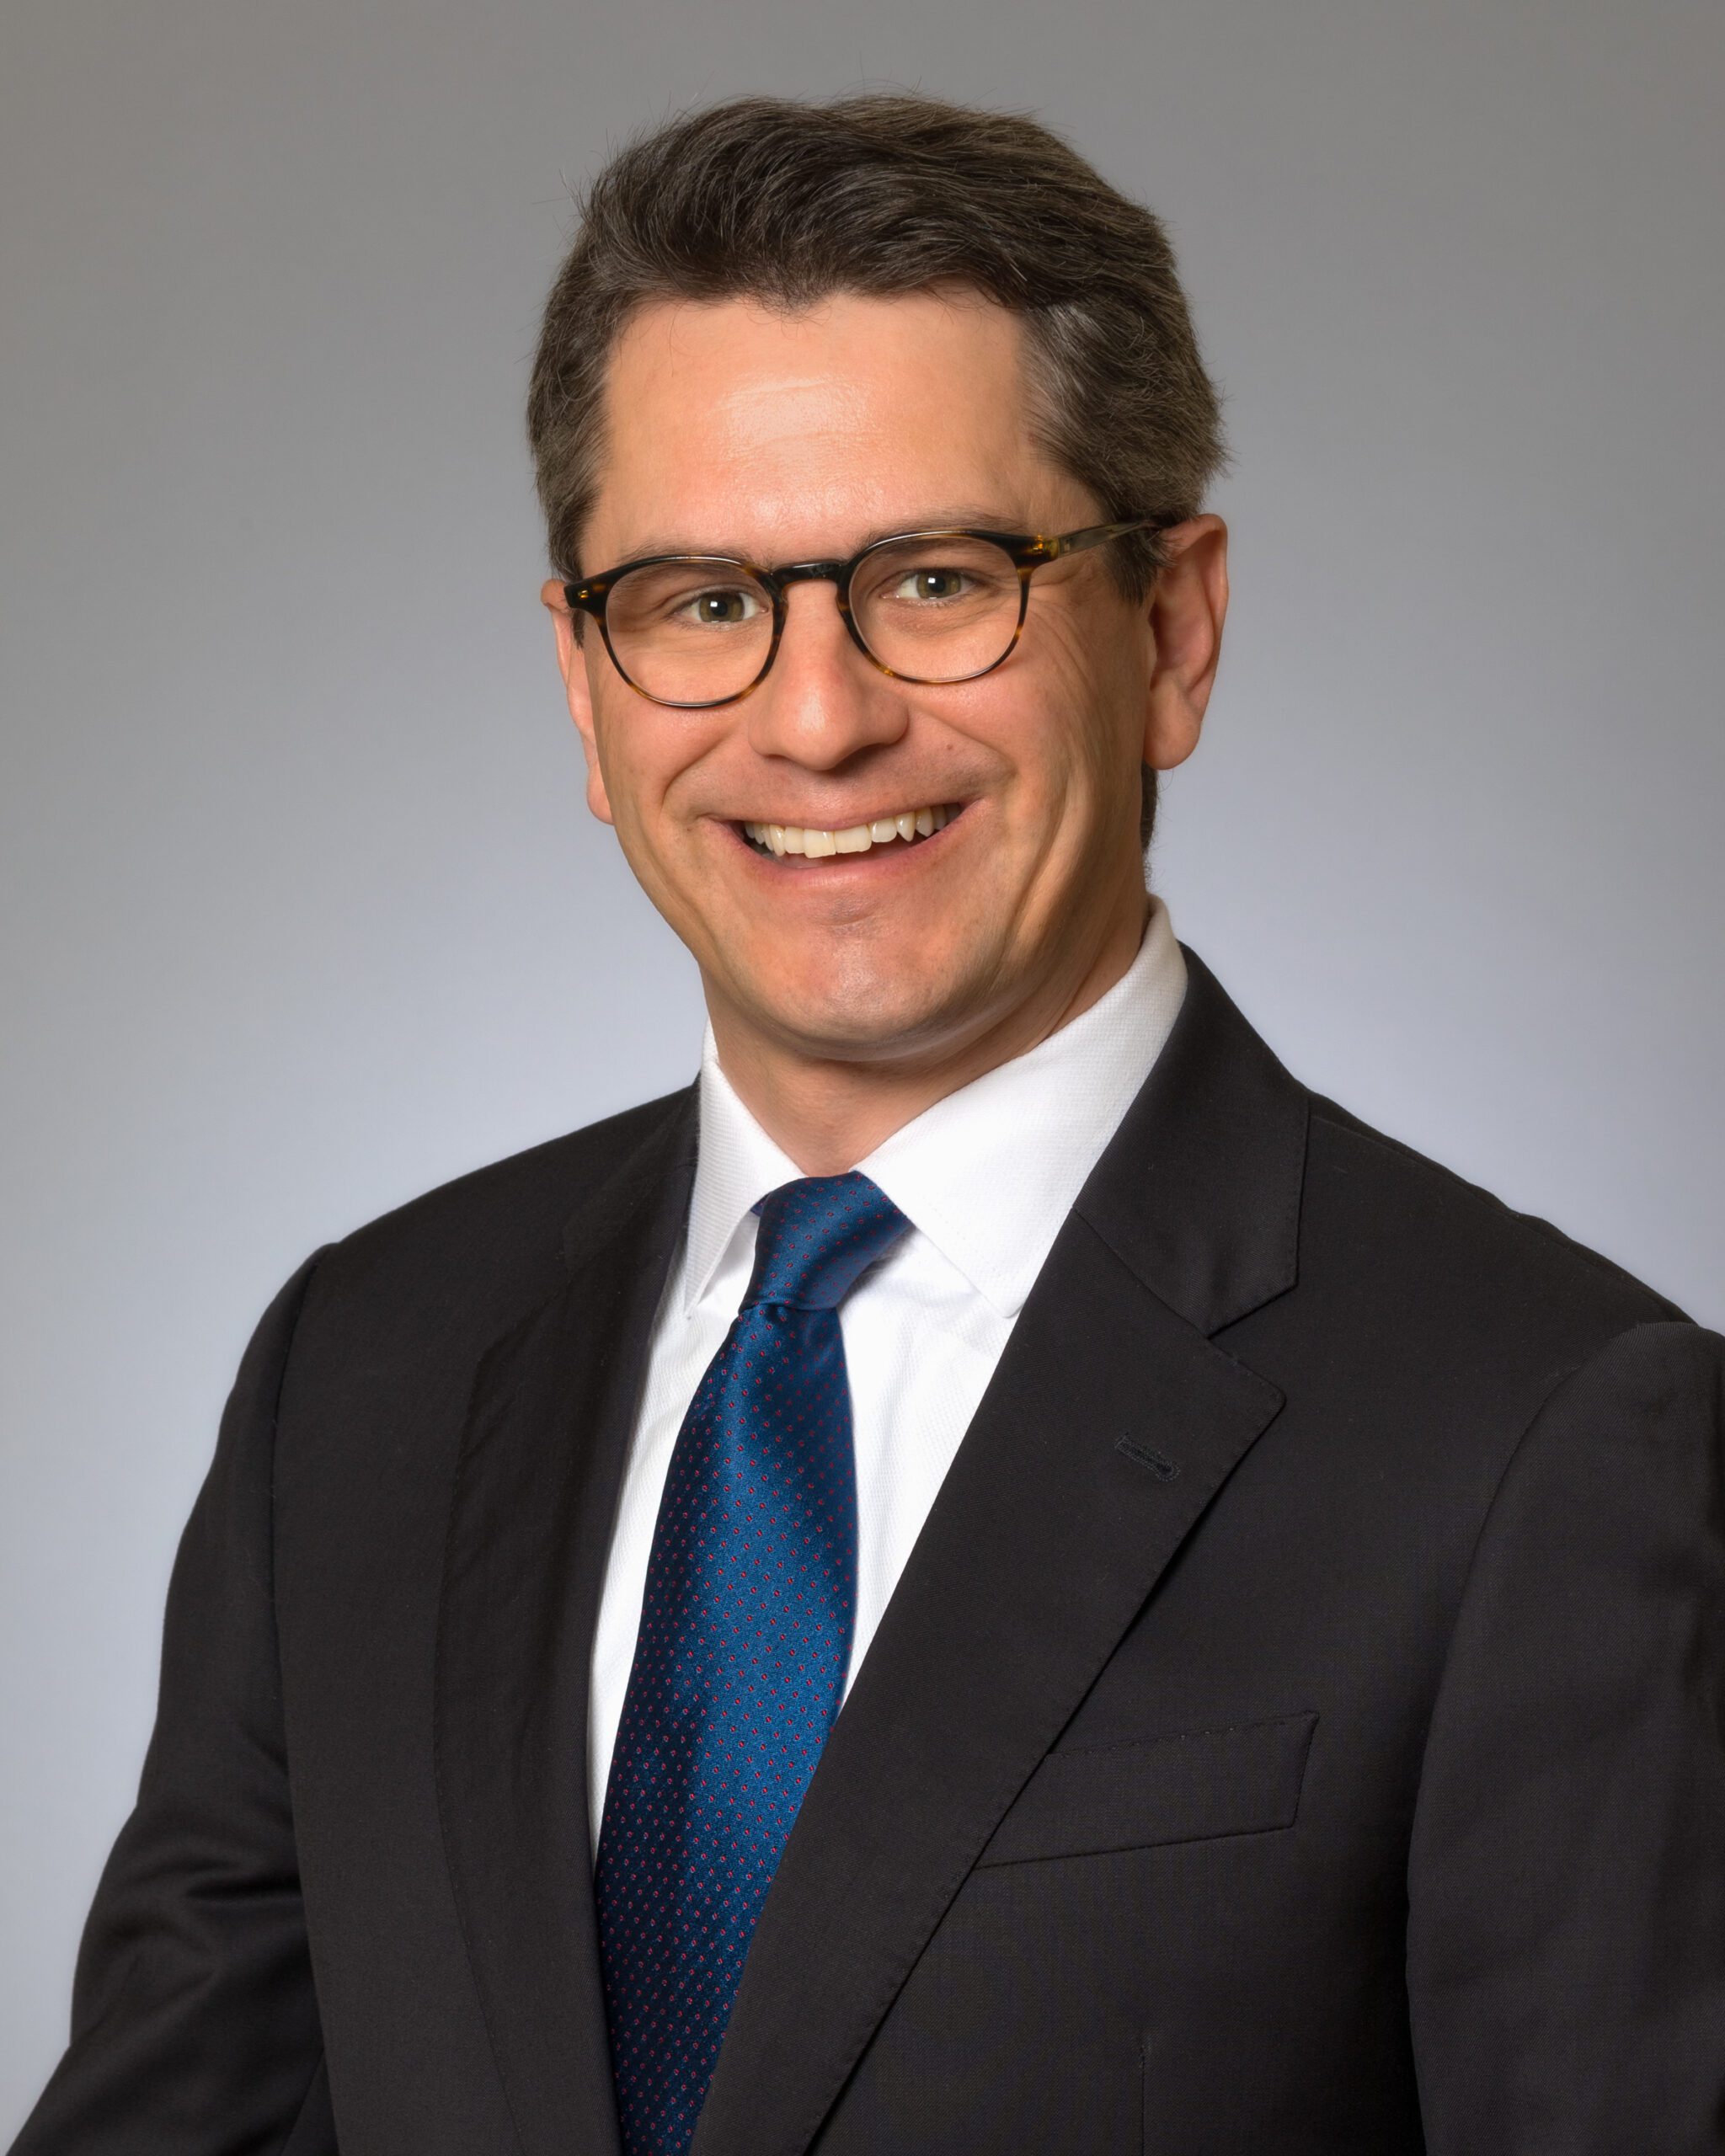 man wearing suit, tie and glasses